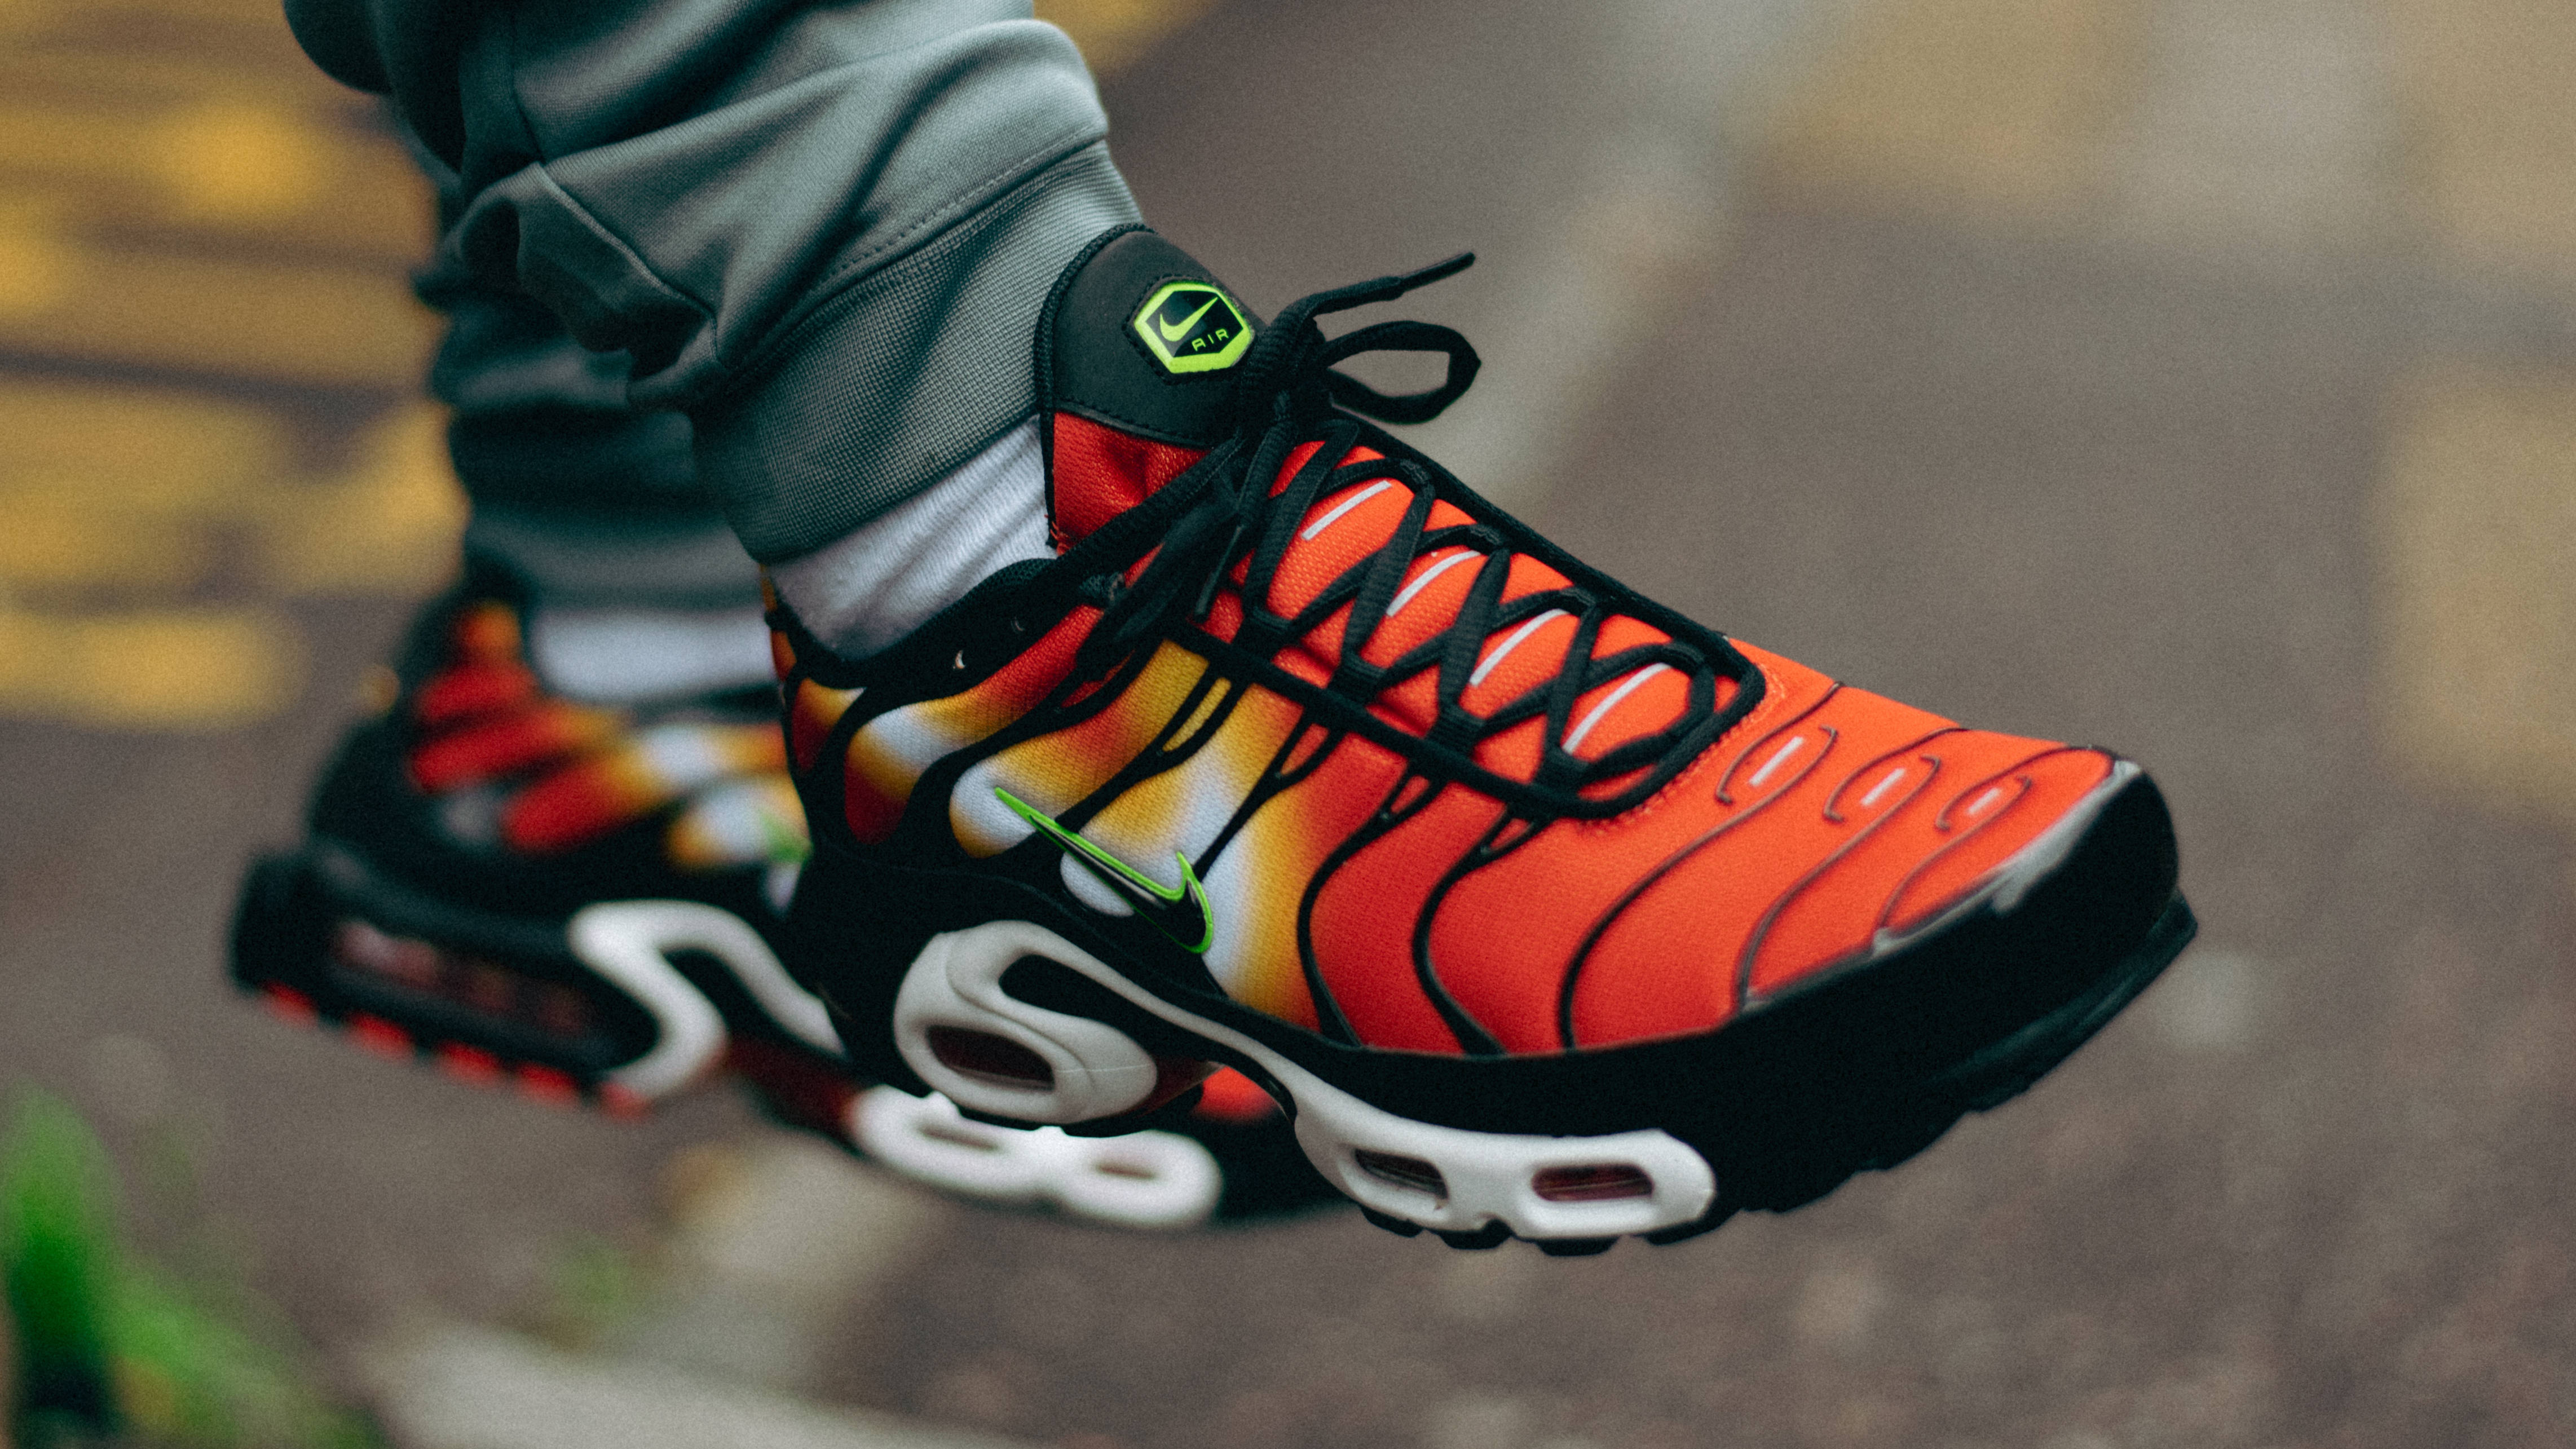 Elevate Your Fits with the Nike TN Max Plus "Sunset Gradient" | The Sole Supplier